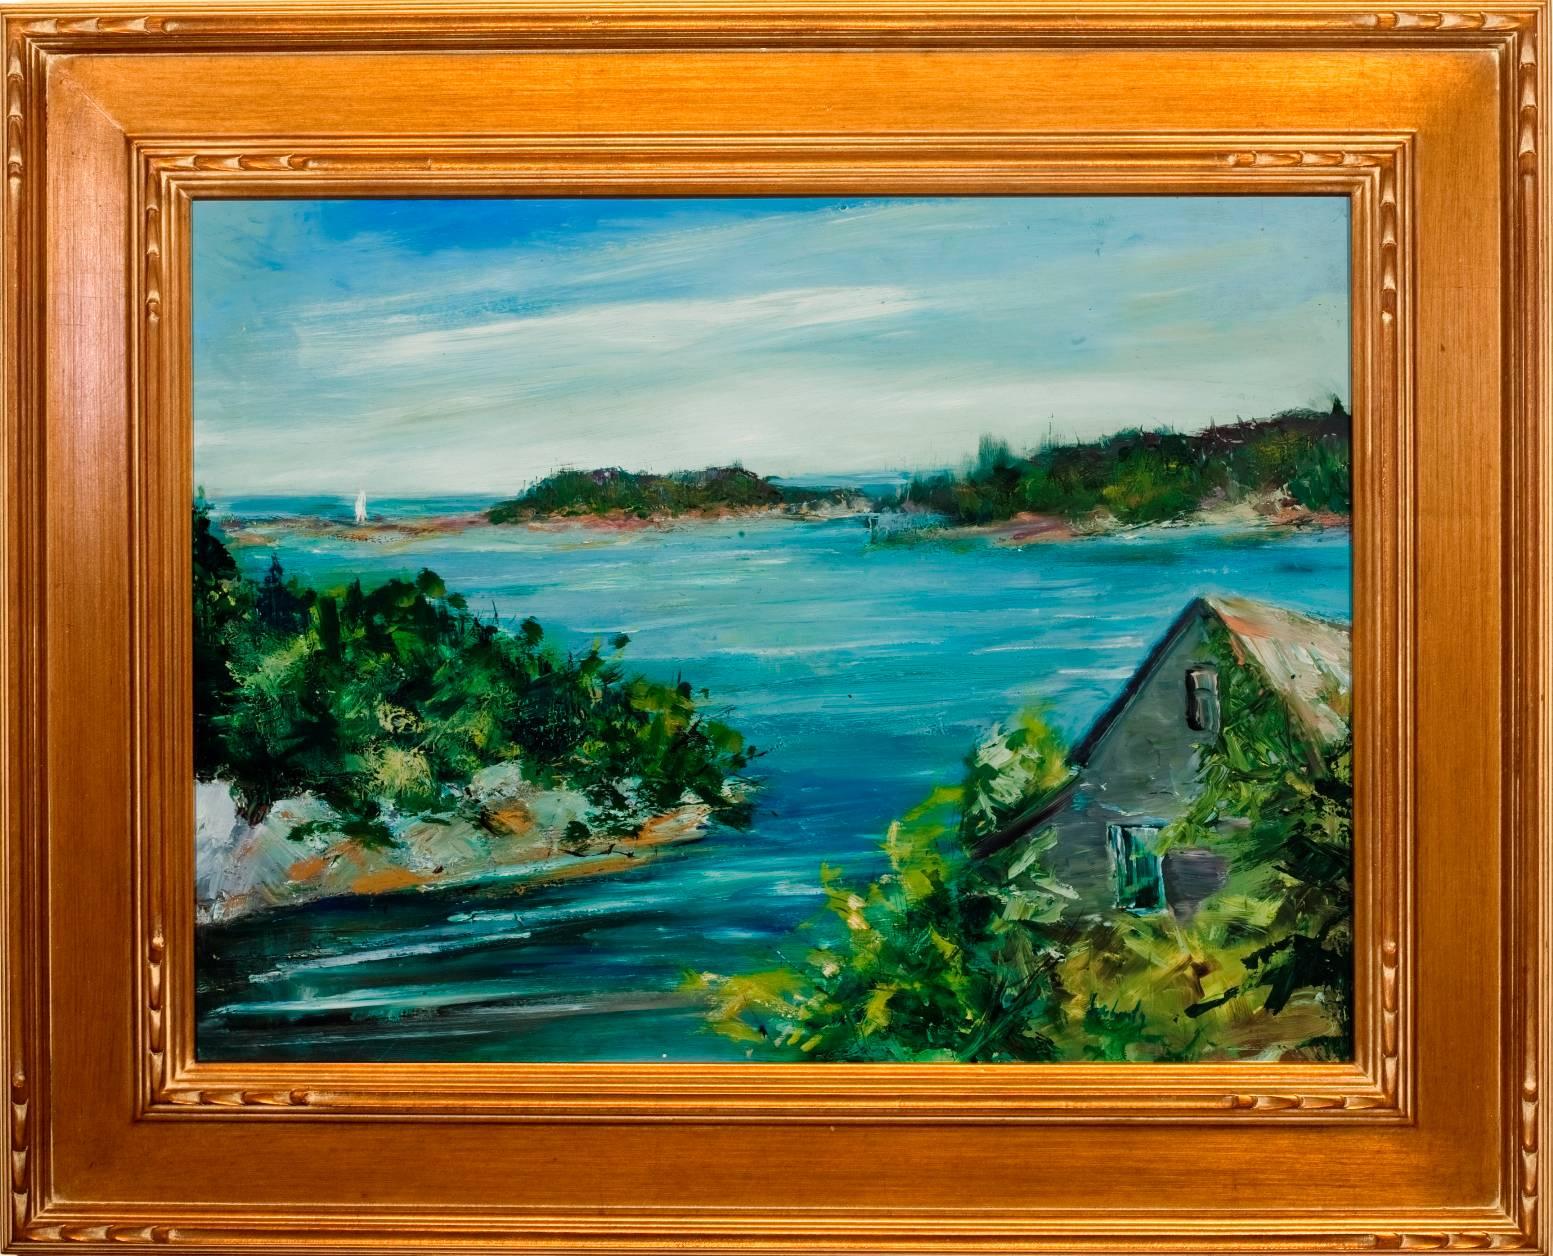 Evelyn Faherty Landscape Painting - "House on the Harbor"